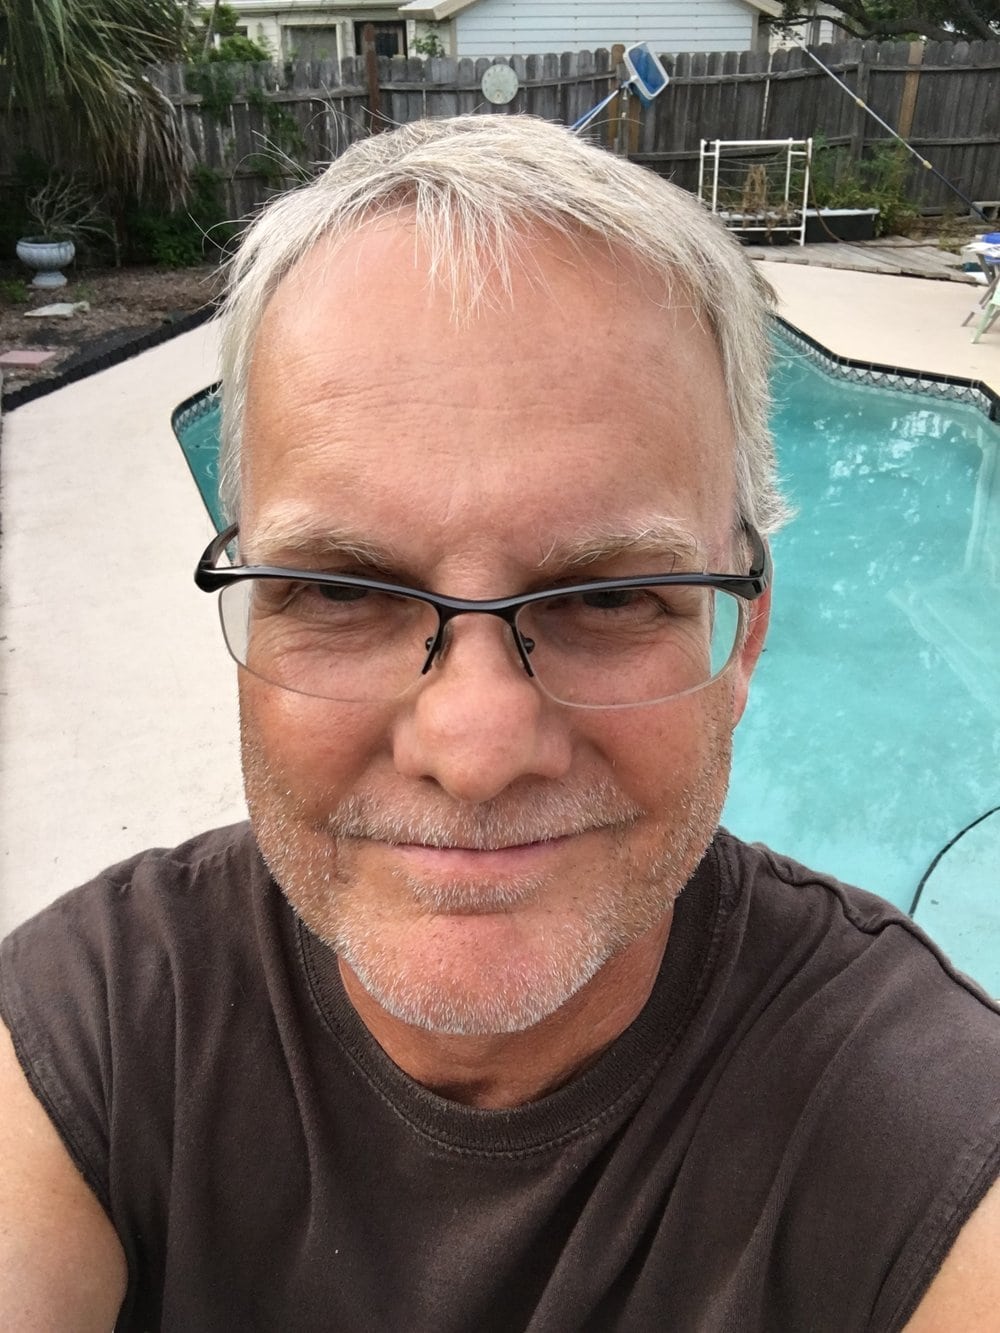 Norm with 3 day stubble, in front of swimming pool